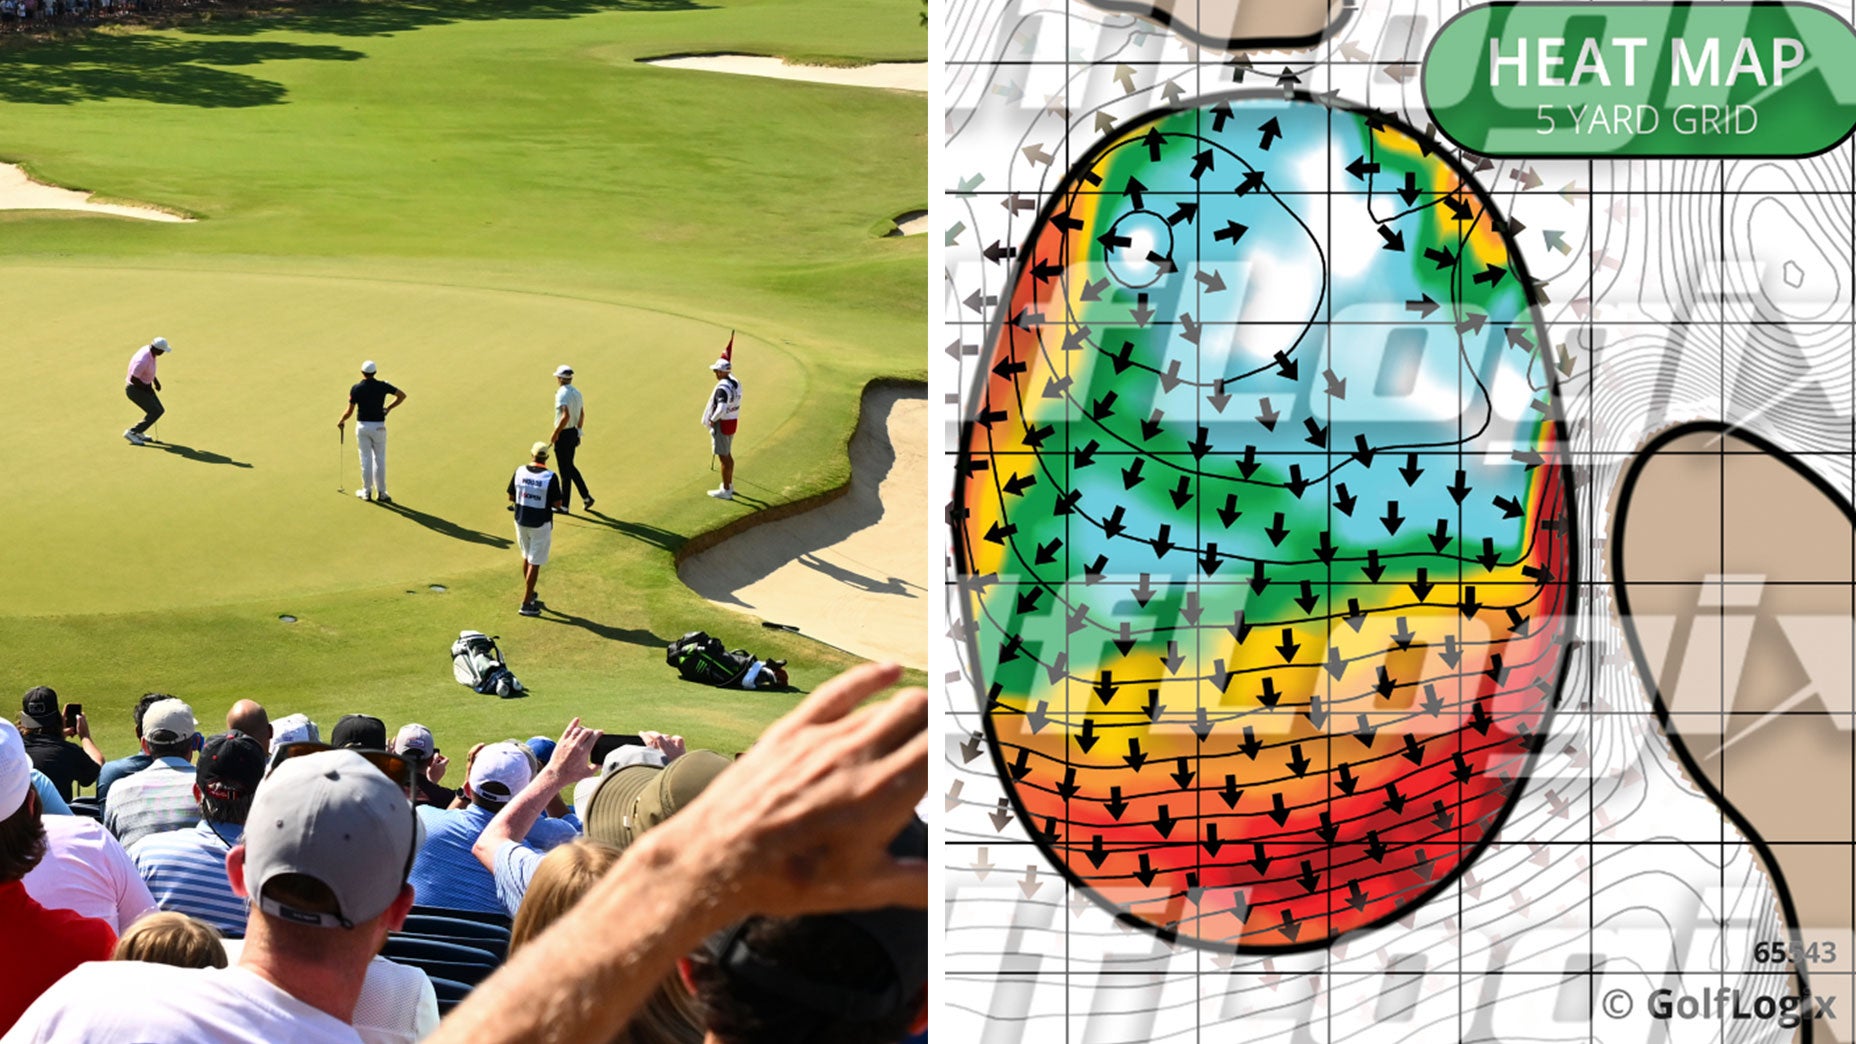 Tiger Woods reacts to a putt at the U.S. Open; heat map of 16th green